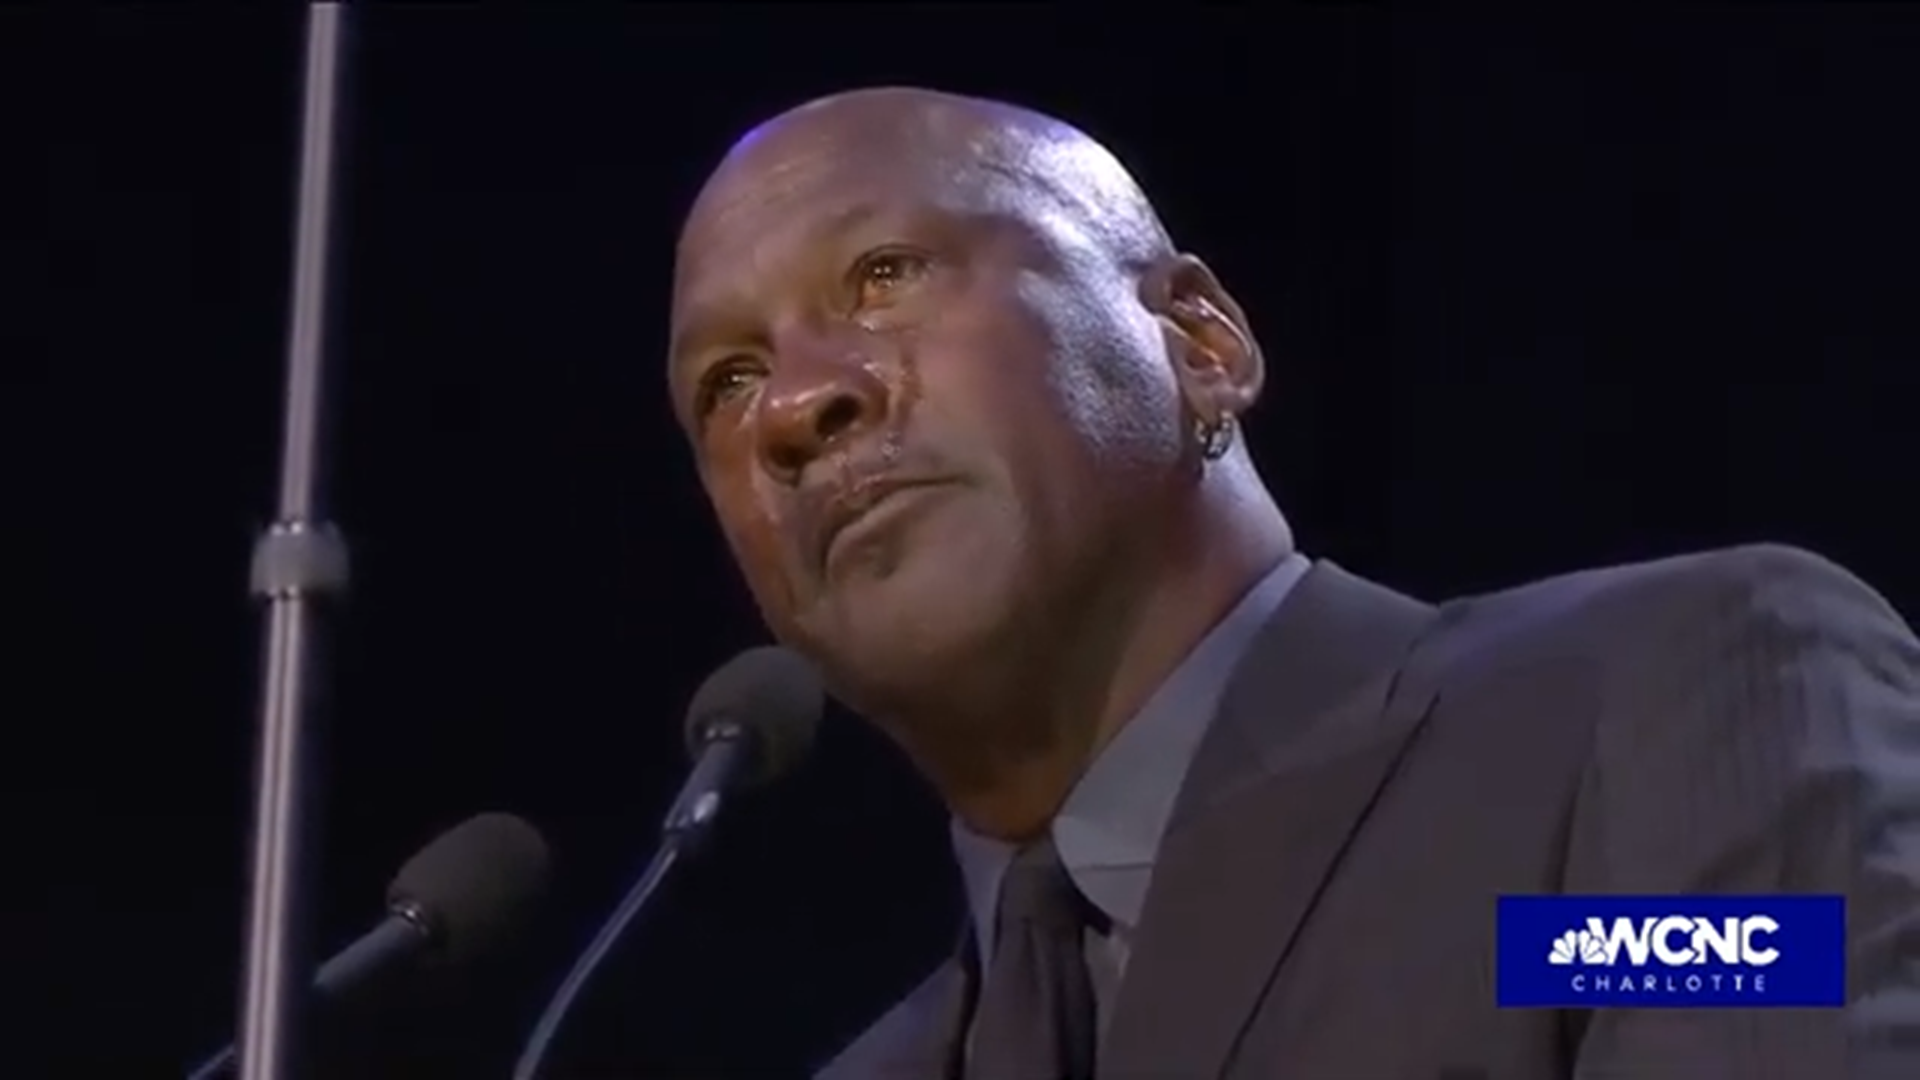 Michael Jordan was emotional and crying as he remembered Kobe Bryant at a memorial service in Los Angeles on Monday.